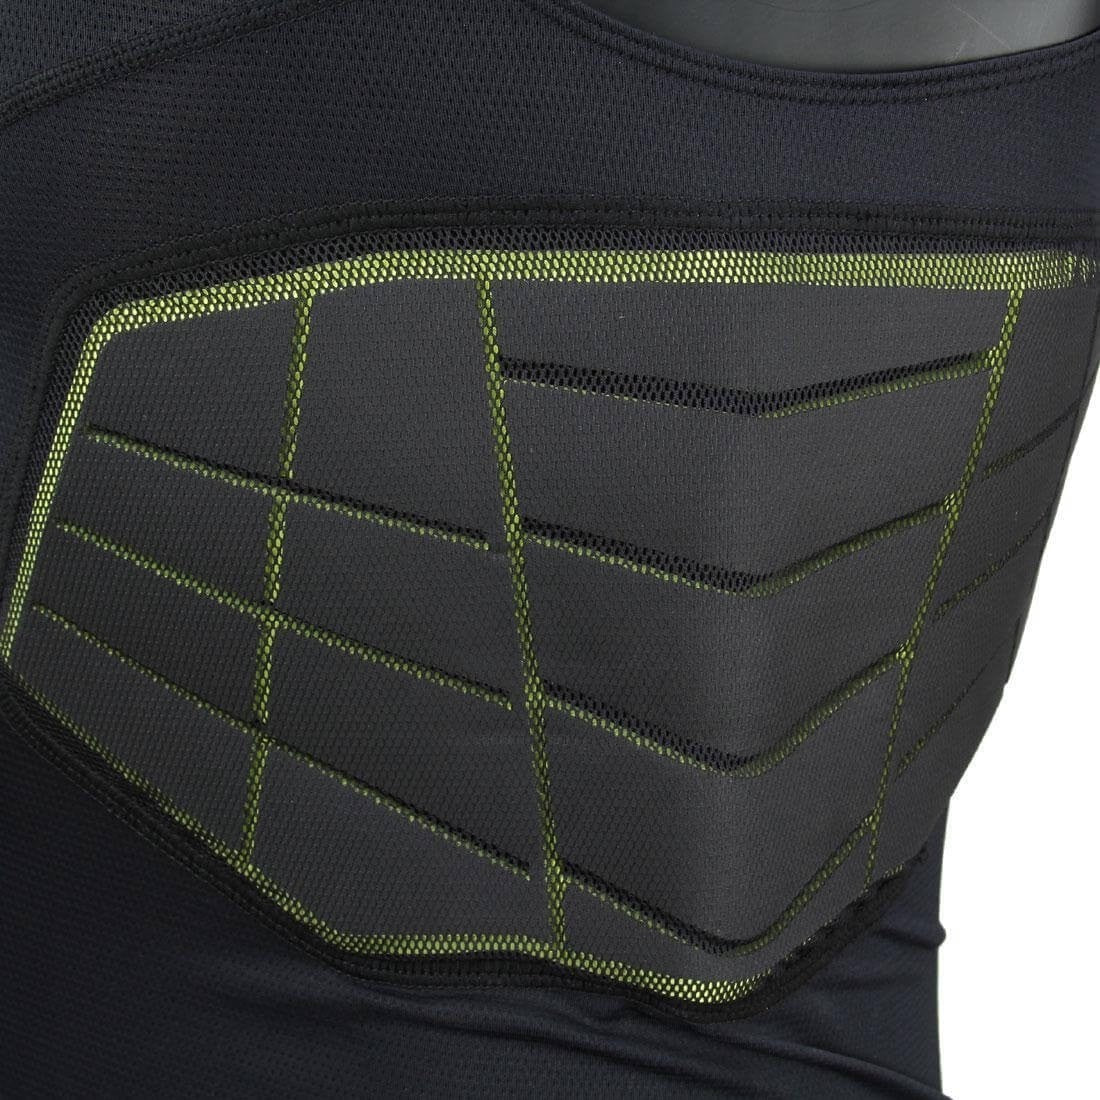 Nike Pro Mens Hyperstrong Compression Elite Sleeveless Basketball